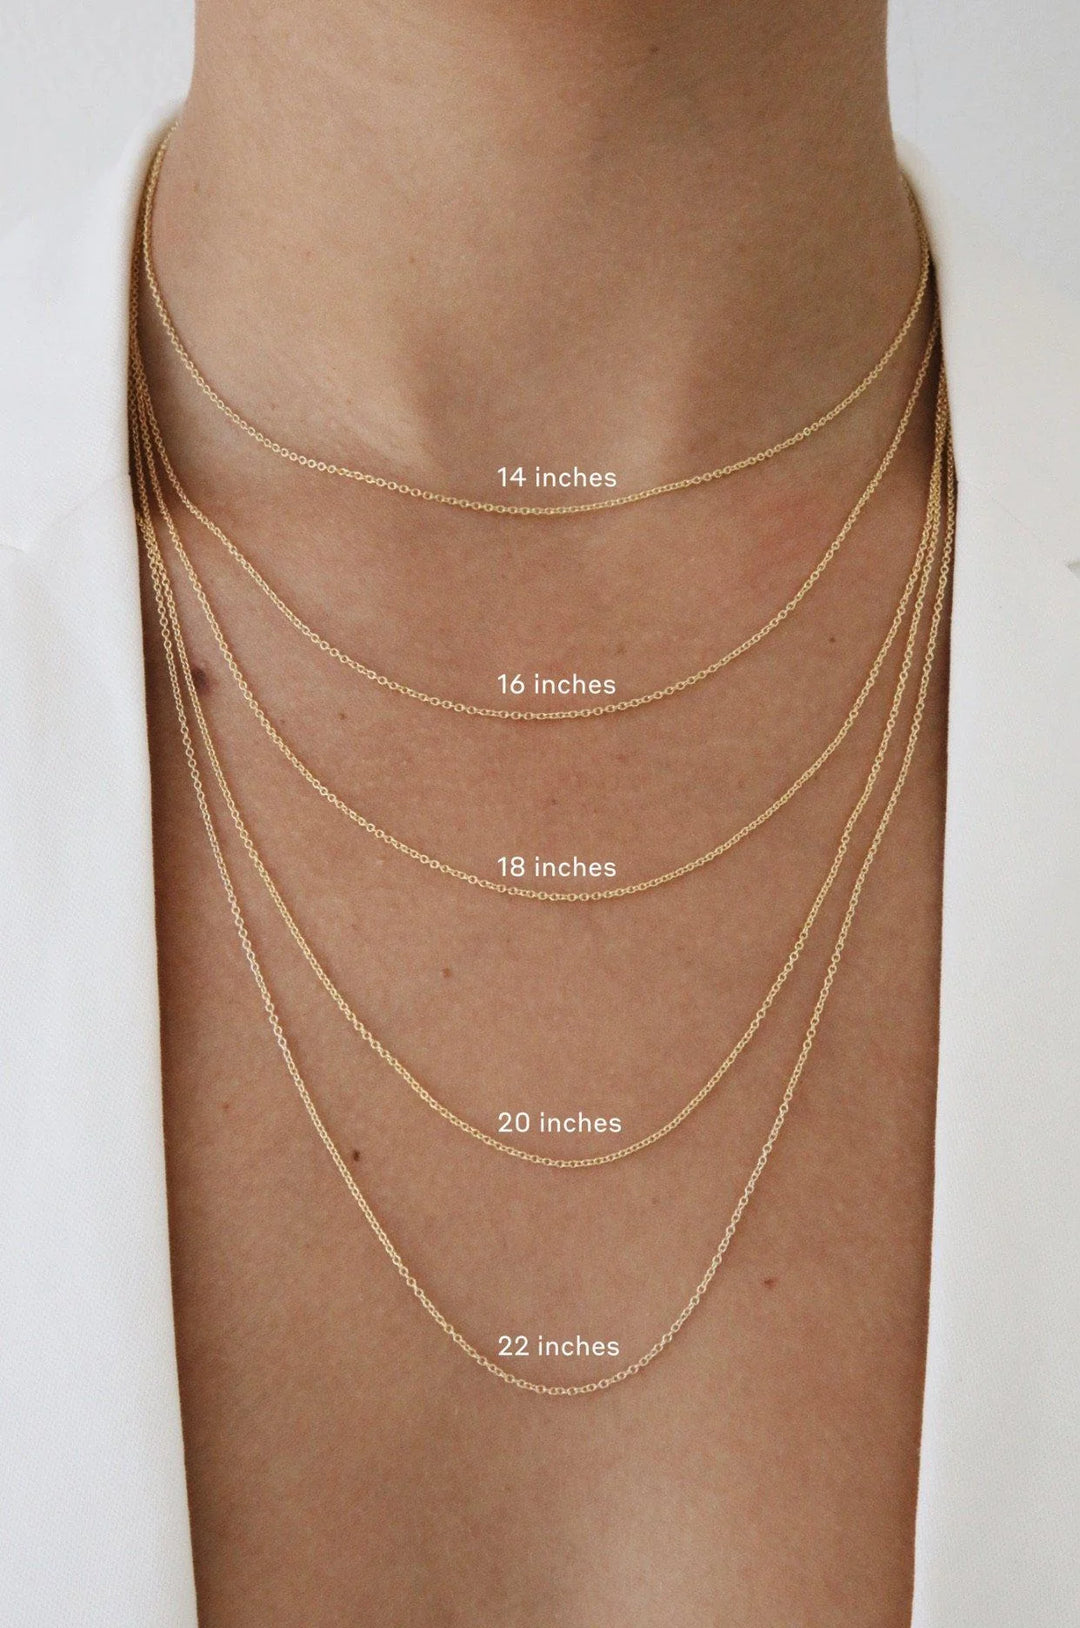 Love Necklace - Solid Gold